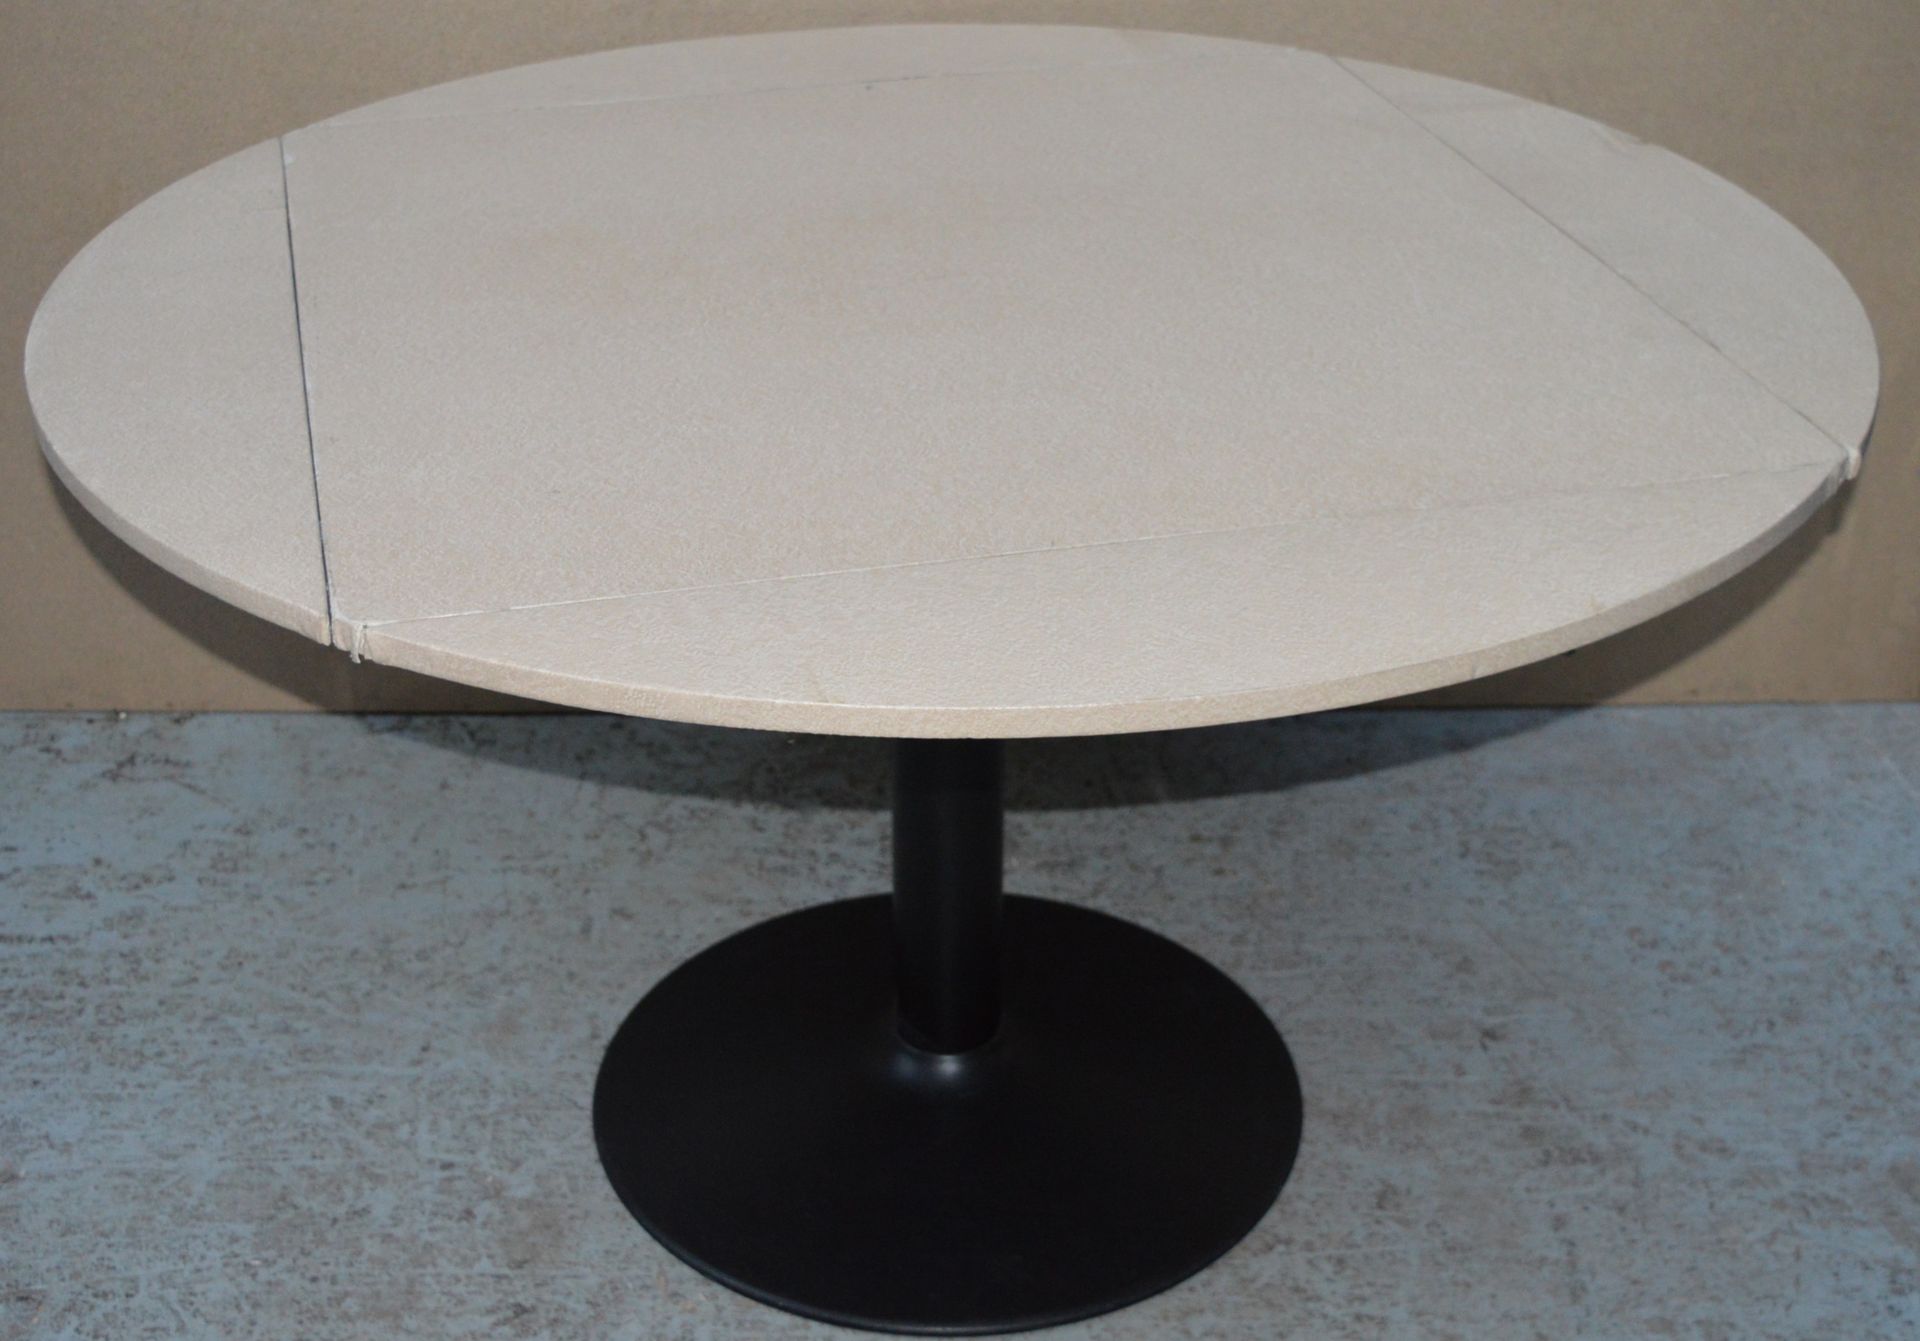 4 x Round to Square Dining Tables - Square Dining Table With Folding Round Drop Leaf Ends and Pillar - Image 5 of 9